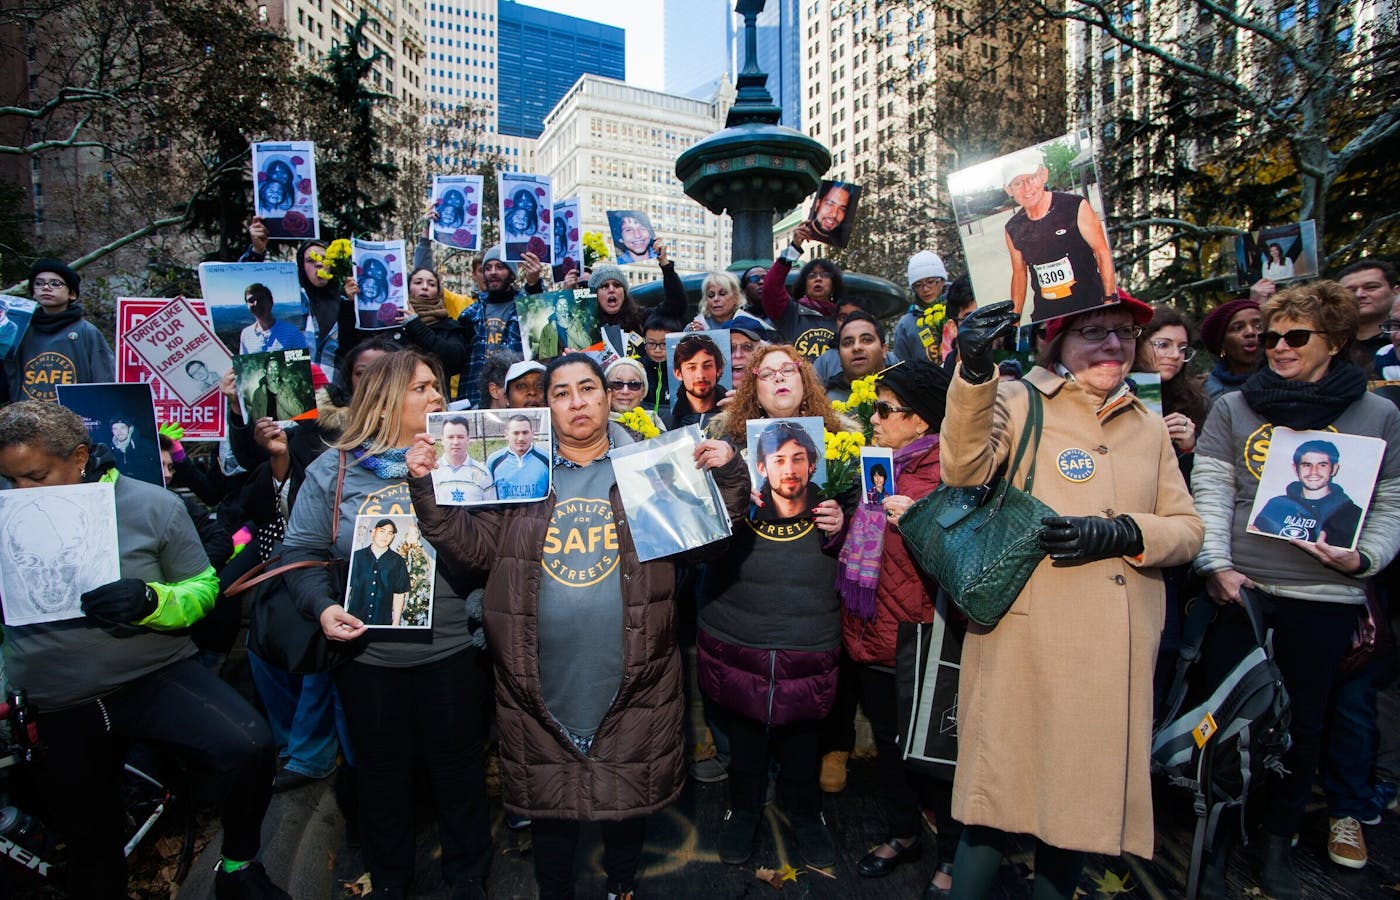 Members of the New York chapter of Families for Safe Streets protest with photos of their loved ones who have died due to traffic violence.